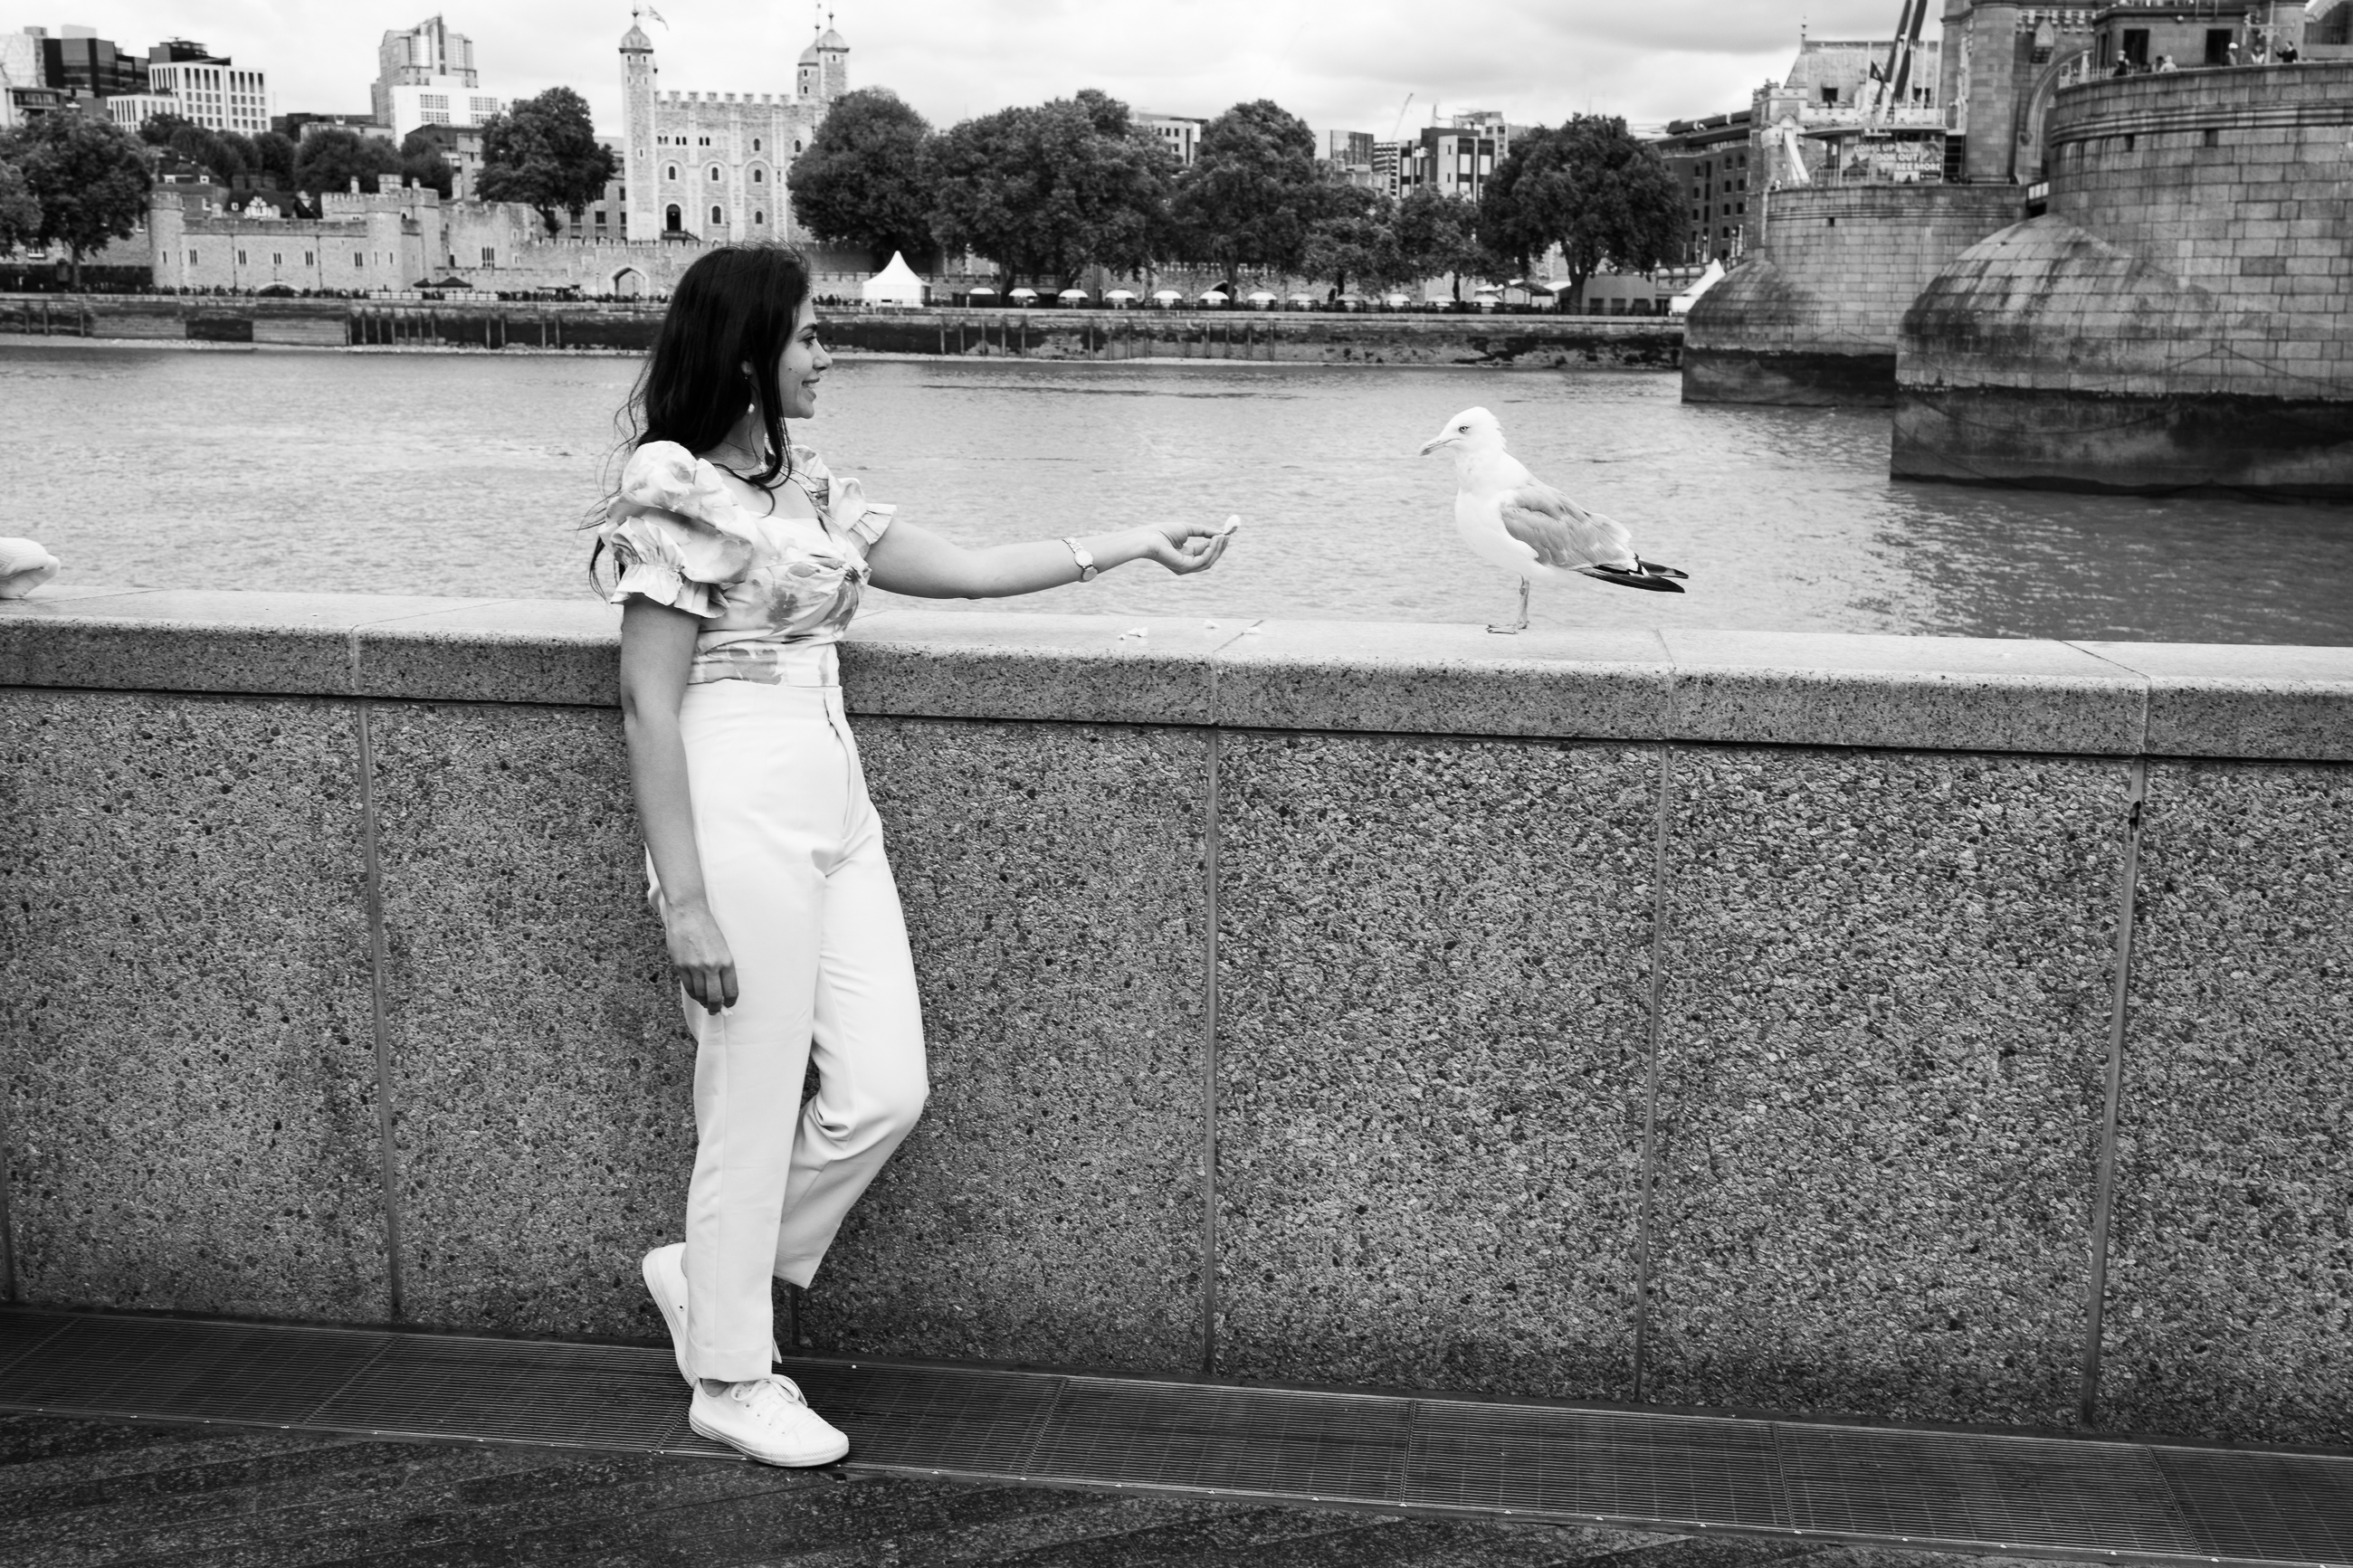 A smartly dressed lady stood by a wall overlooking the River Thames in London offers a seagull some bread. Out of shot, she is recorded by two video cameras. 